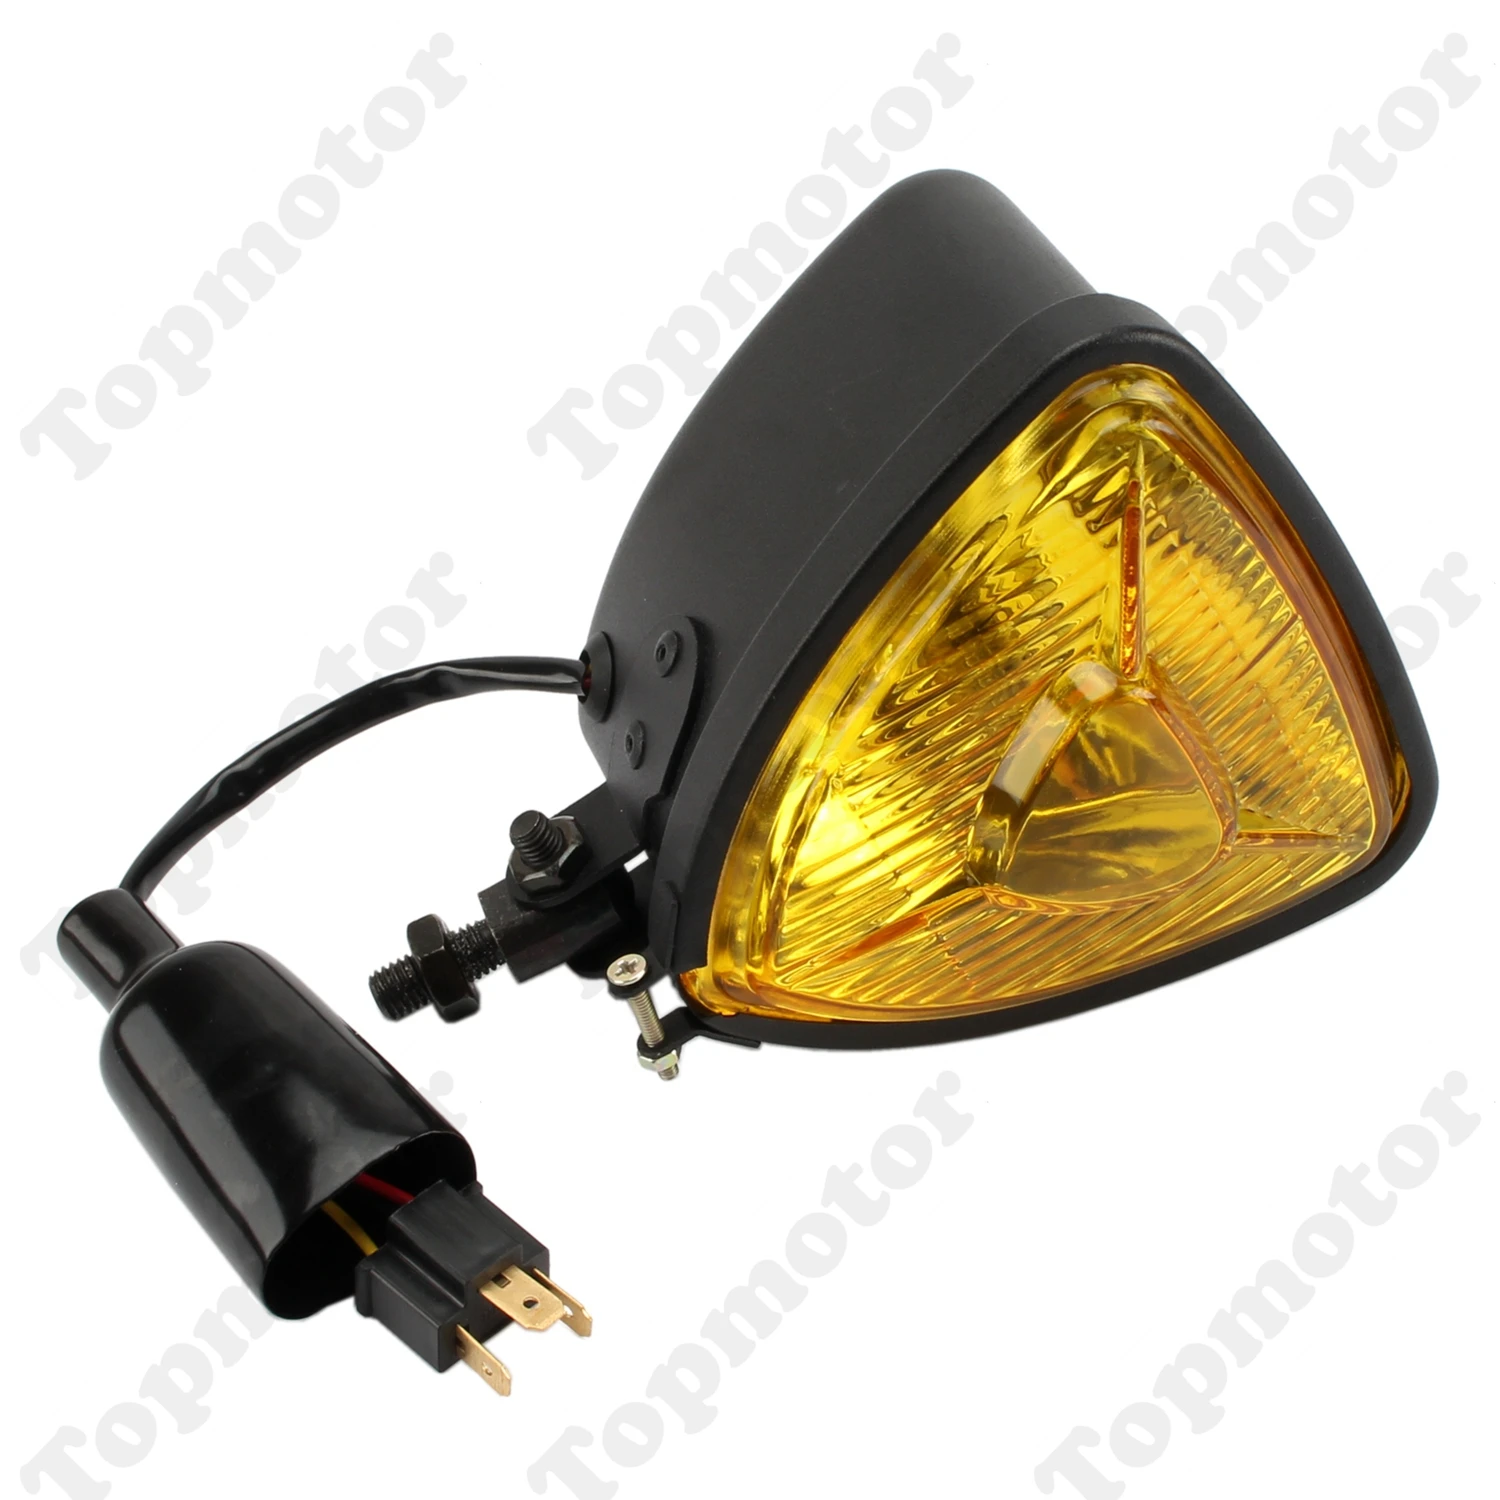 

Motorcycle Vintage Front Headlight Amber Triangle Retro H4 Head Light For Harley Bobber Chopper SX650 Old School Cafe Racer